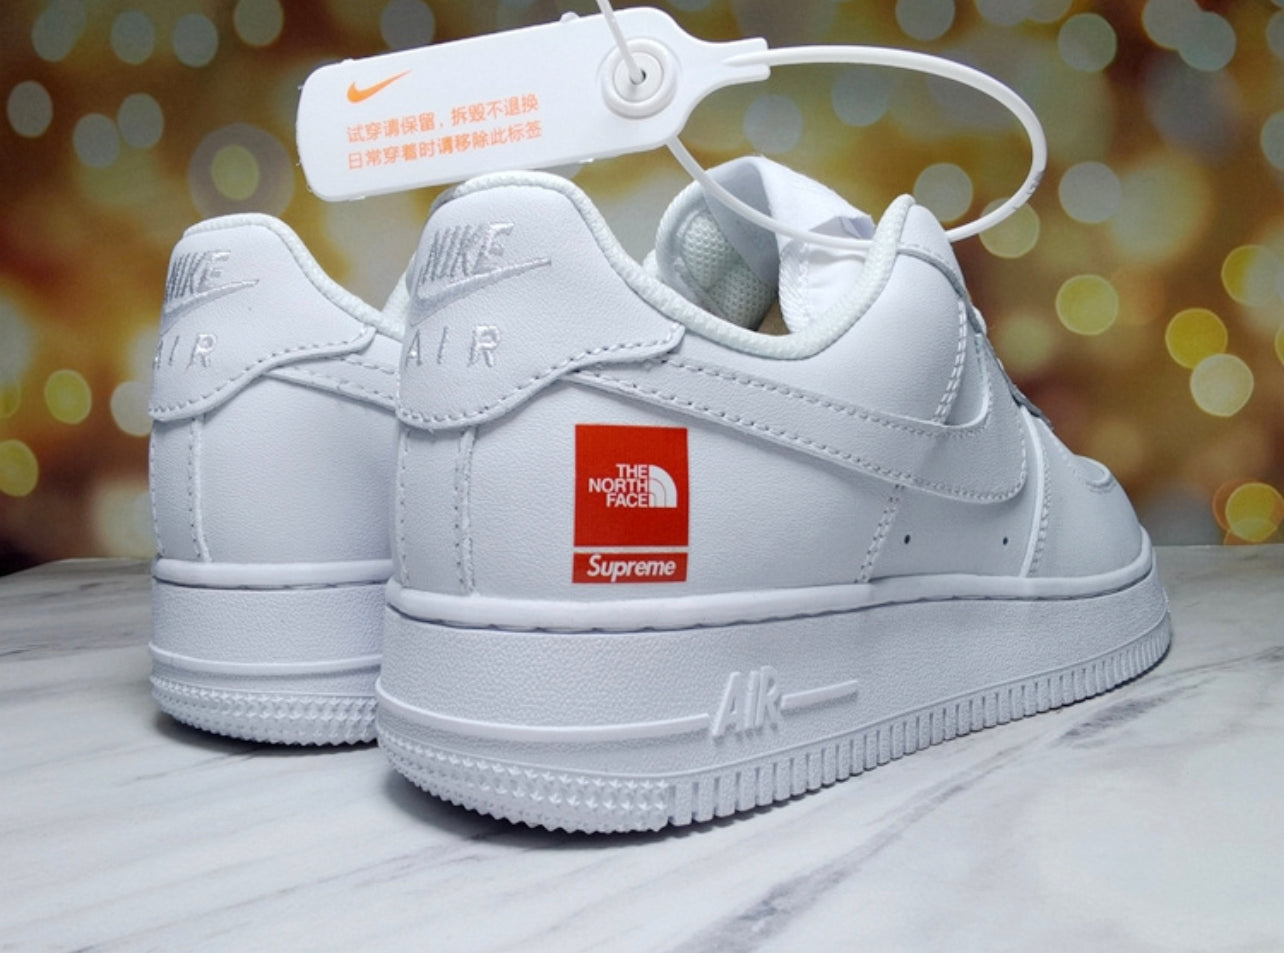 Supreme x The NorthFace x Nike Air Force 1 Low